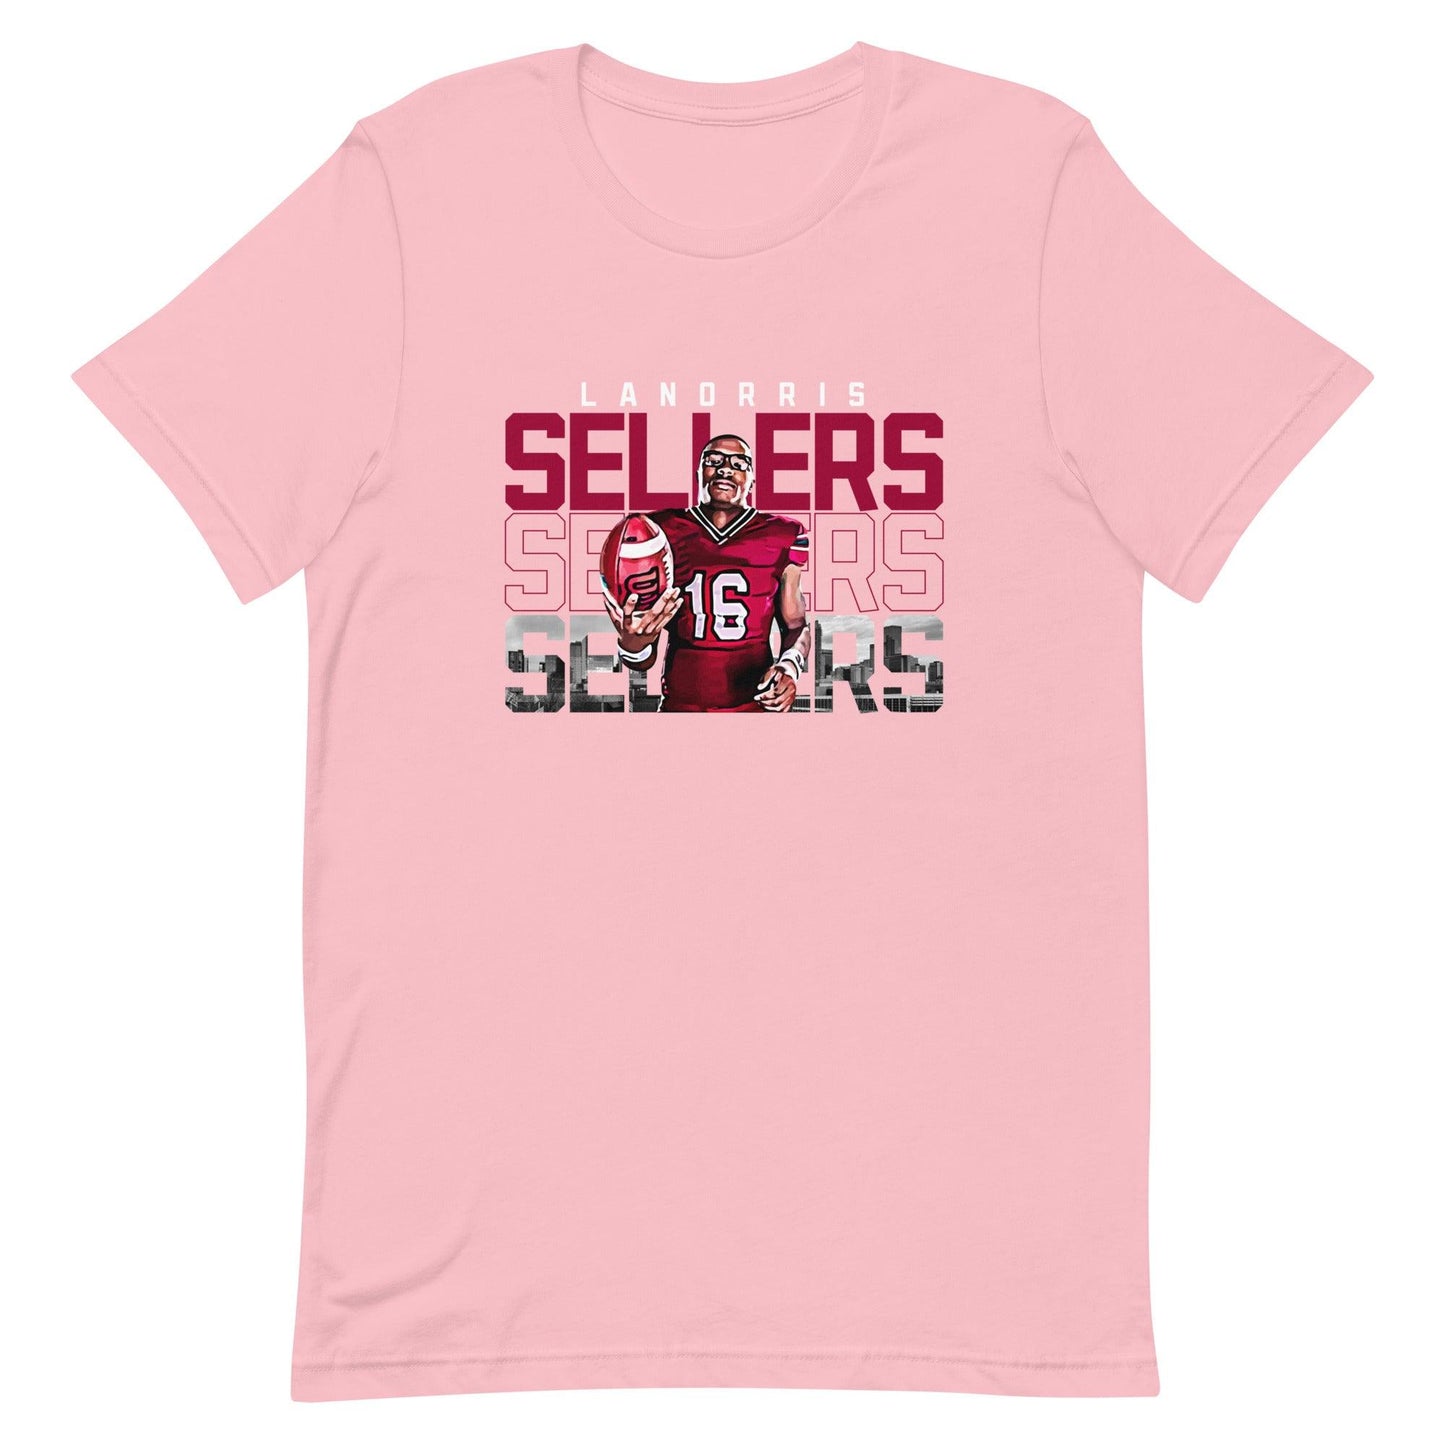 Lanorris Sellers "Gameday" t-shirt - Fan Arch